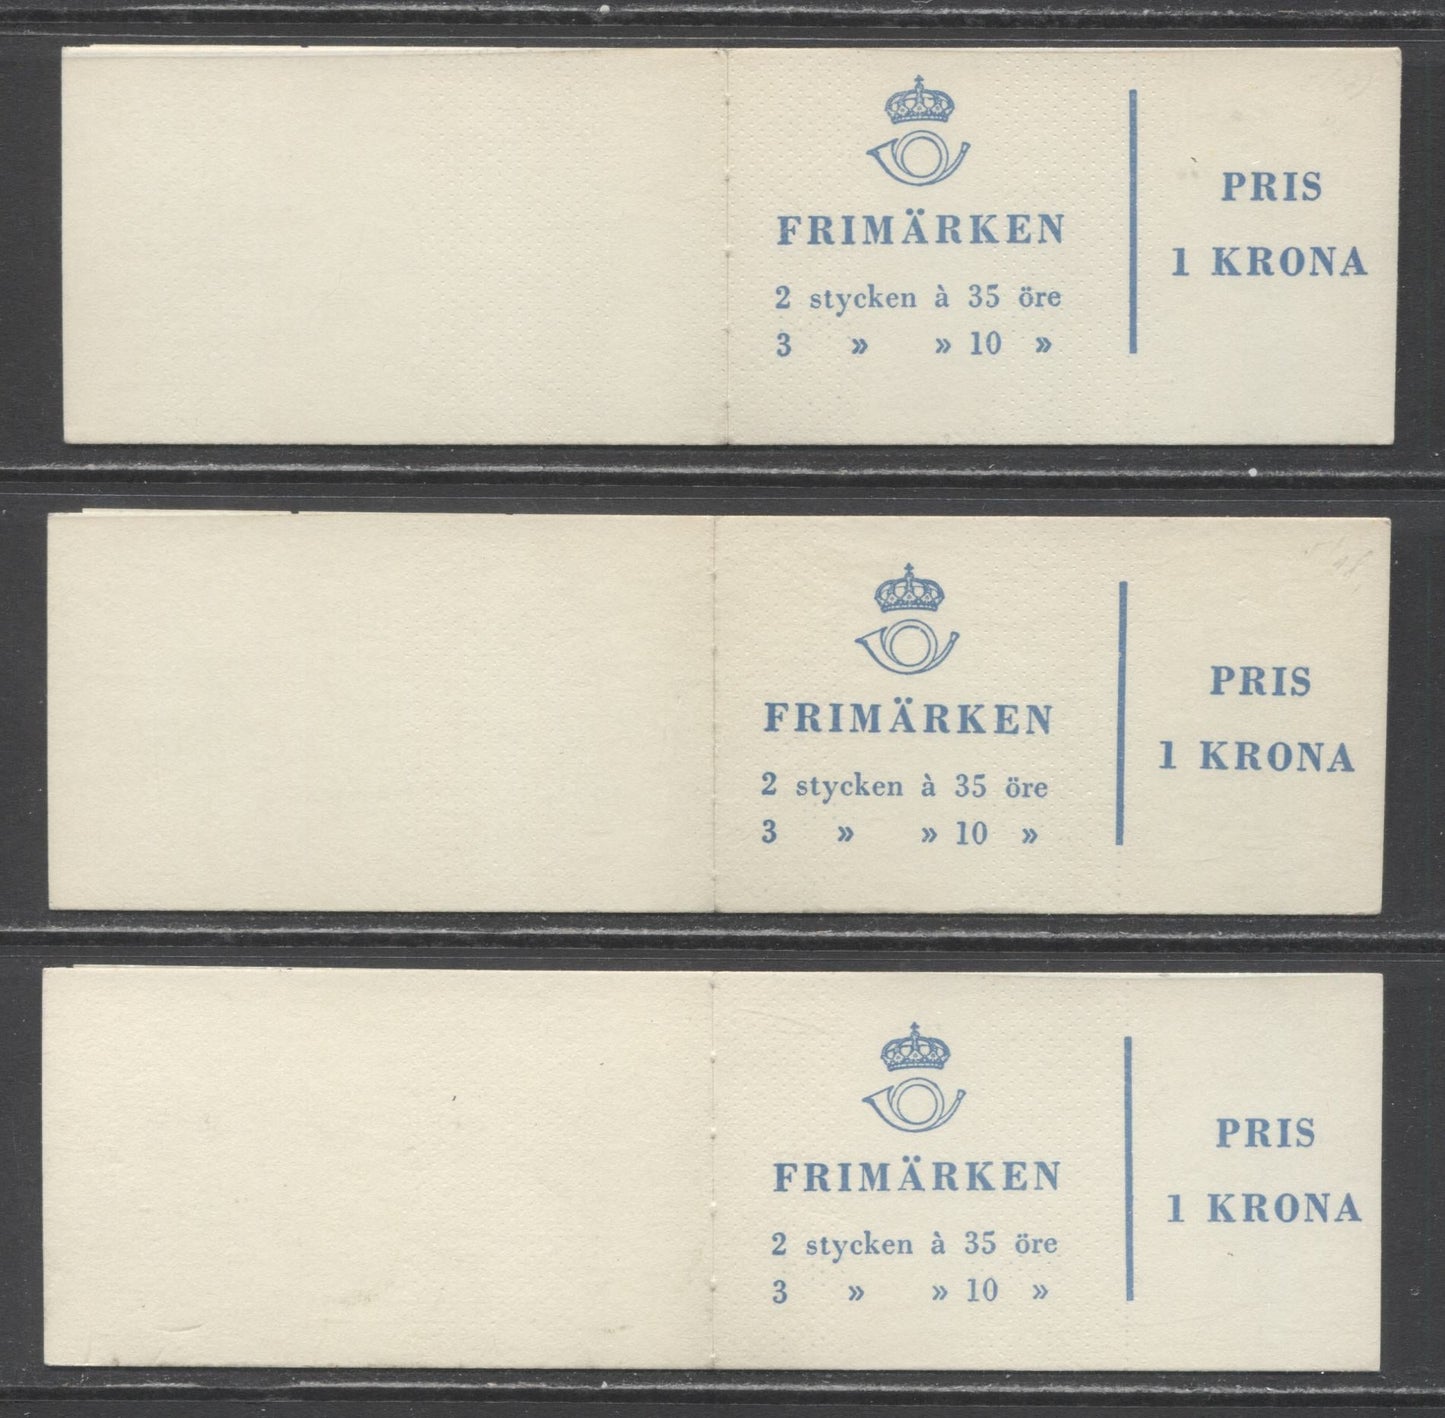 Lot 165 Sweden SC#586b (Facit #HA10RH)/586b (Facit #HA10RHOH) 1962 Re-Engraved King Gustav VI Adolf Definitive Issue, All With Blank Selvedge, Upright & Inverted Panes, 10 Ore At Left & Right, 3 VFNH Booklets of 6 (2 +3 + Label), Estimated Value $21